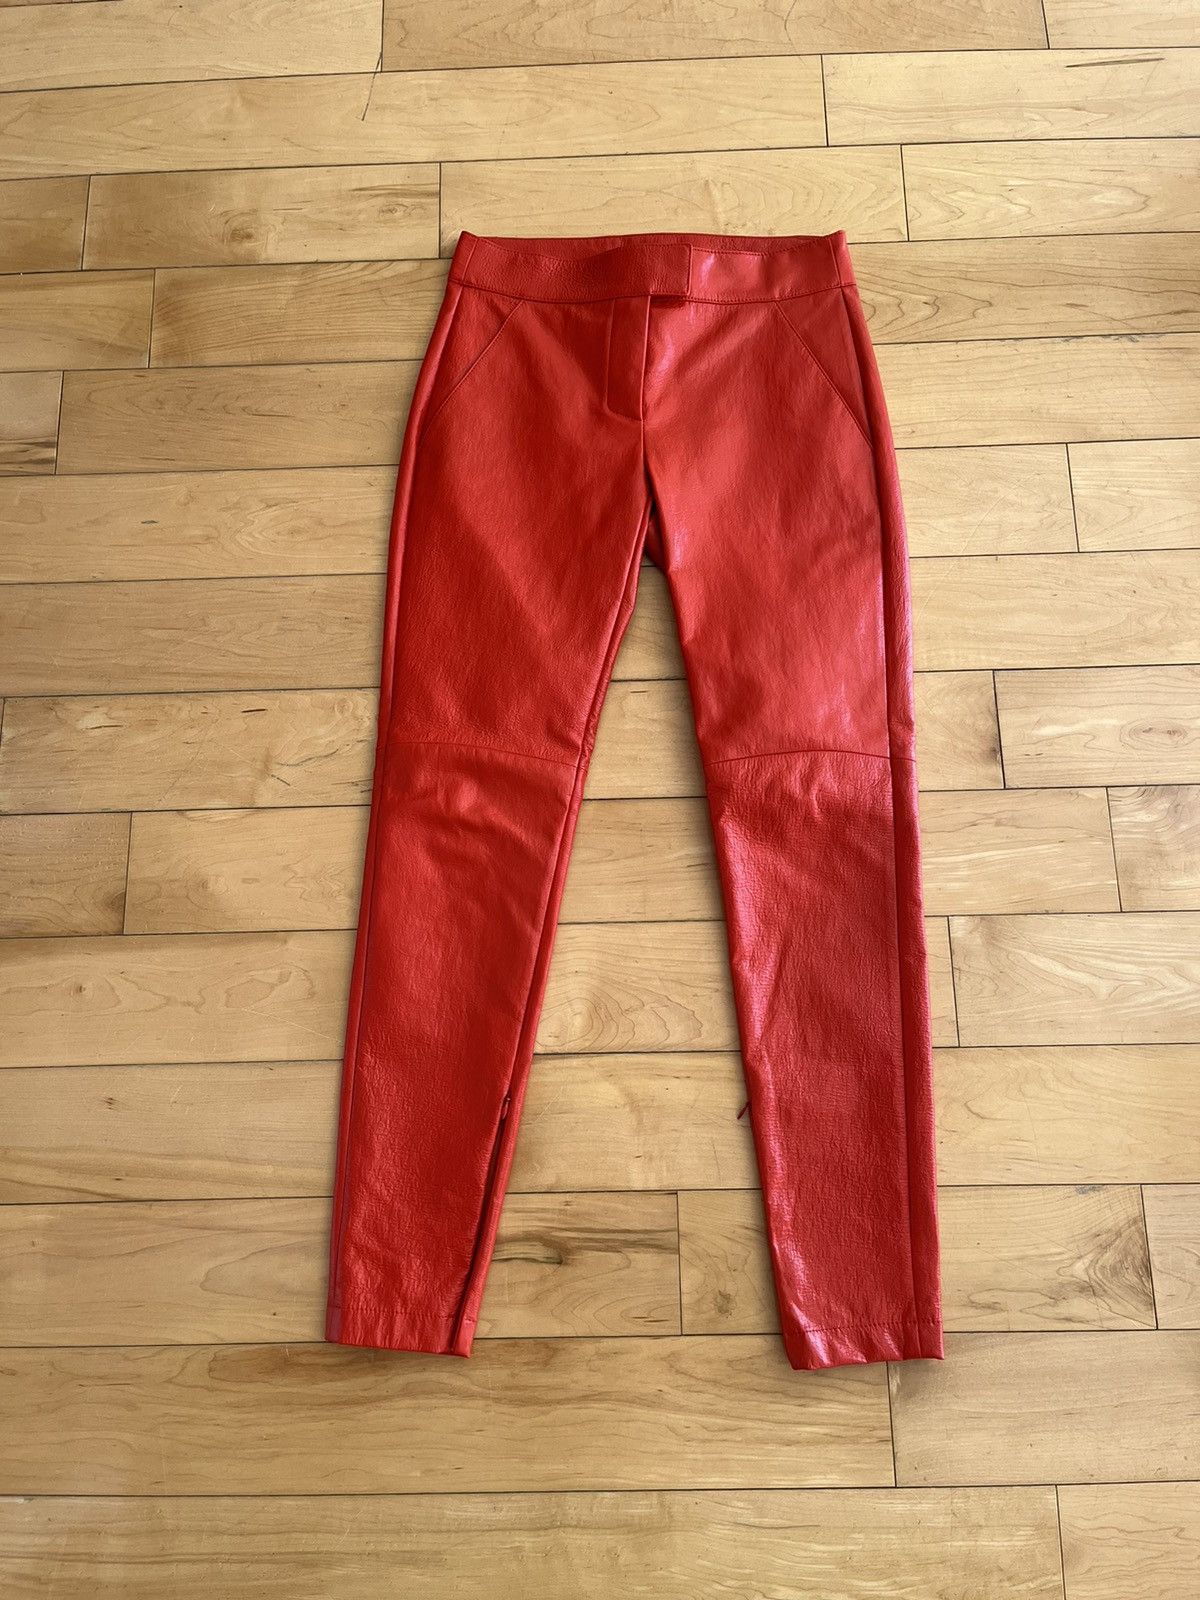 NWT - Givenchy Skinny Calfskin Leather Pants - 1